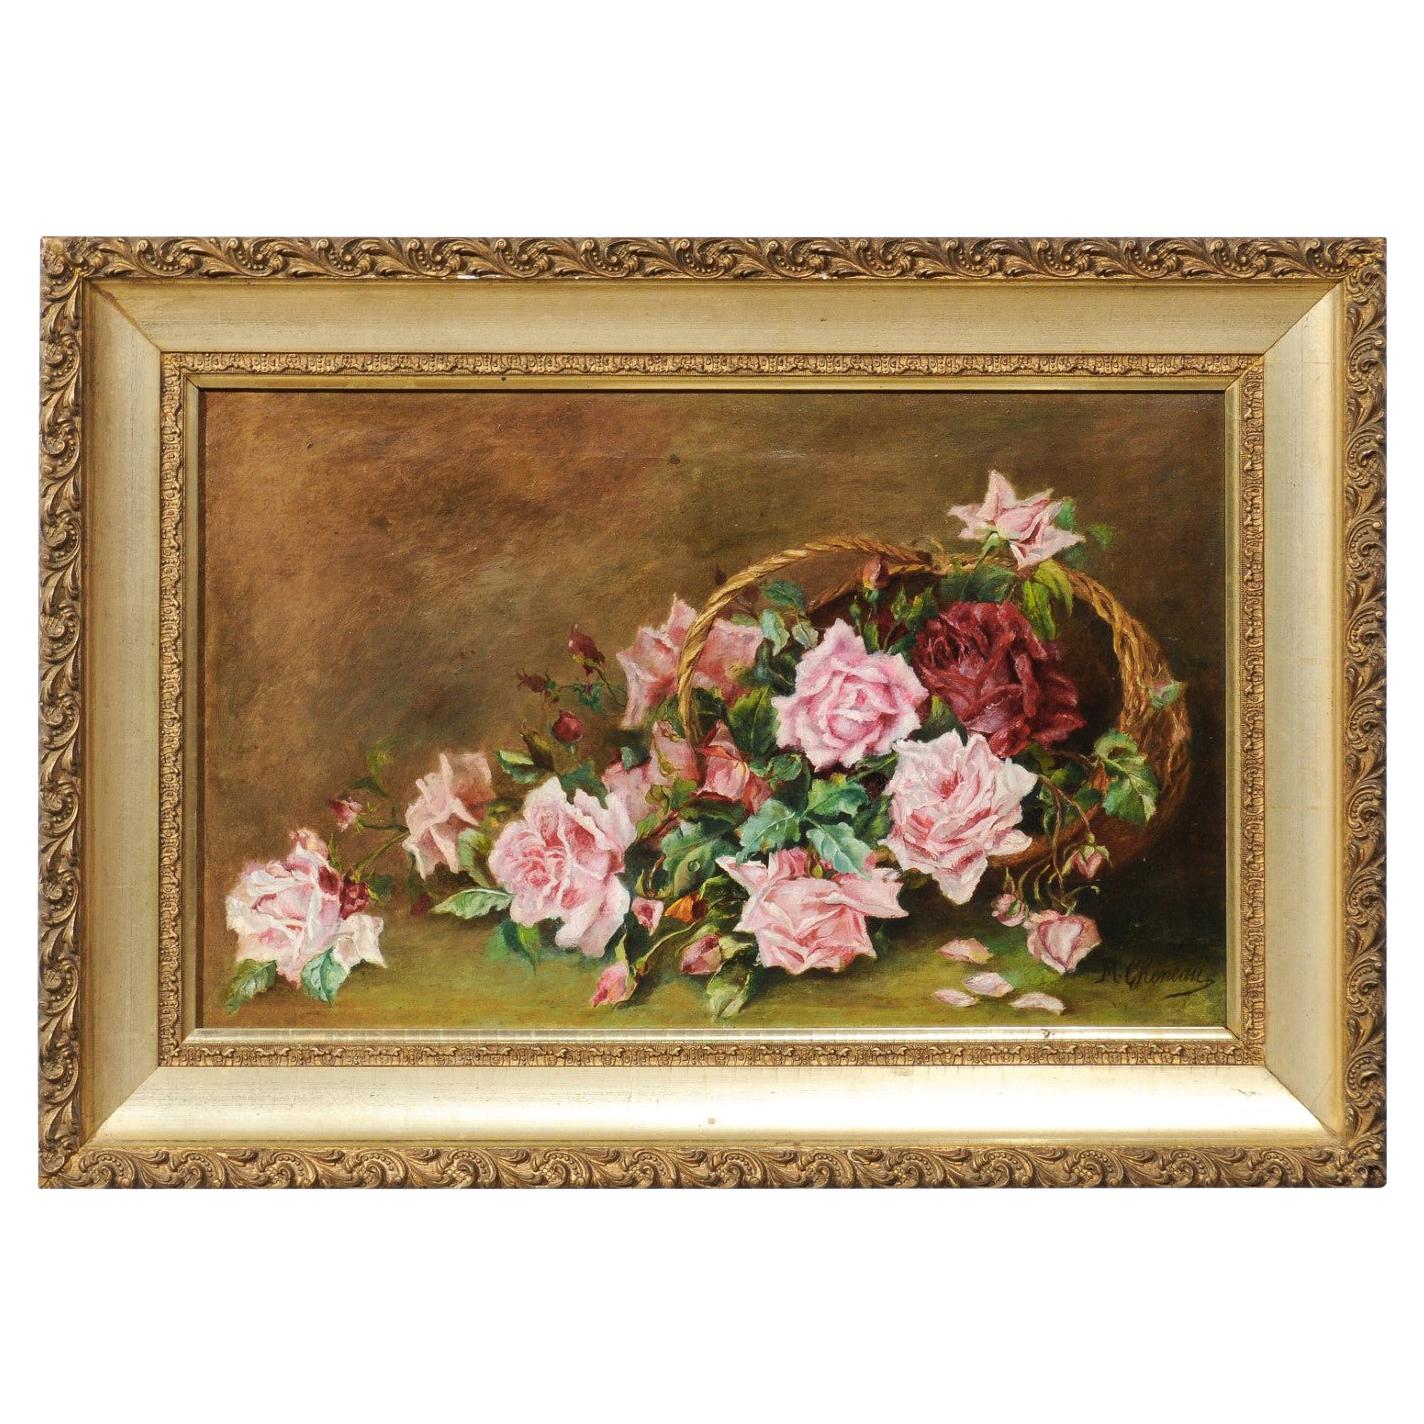 French 19th Century Framed Floral Oil on Canvas Painting Depicting Roses